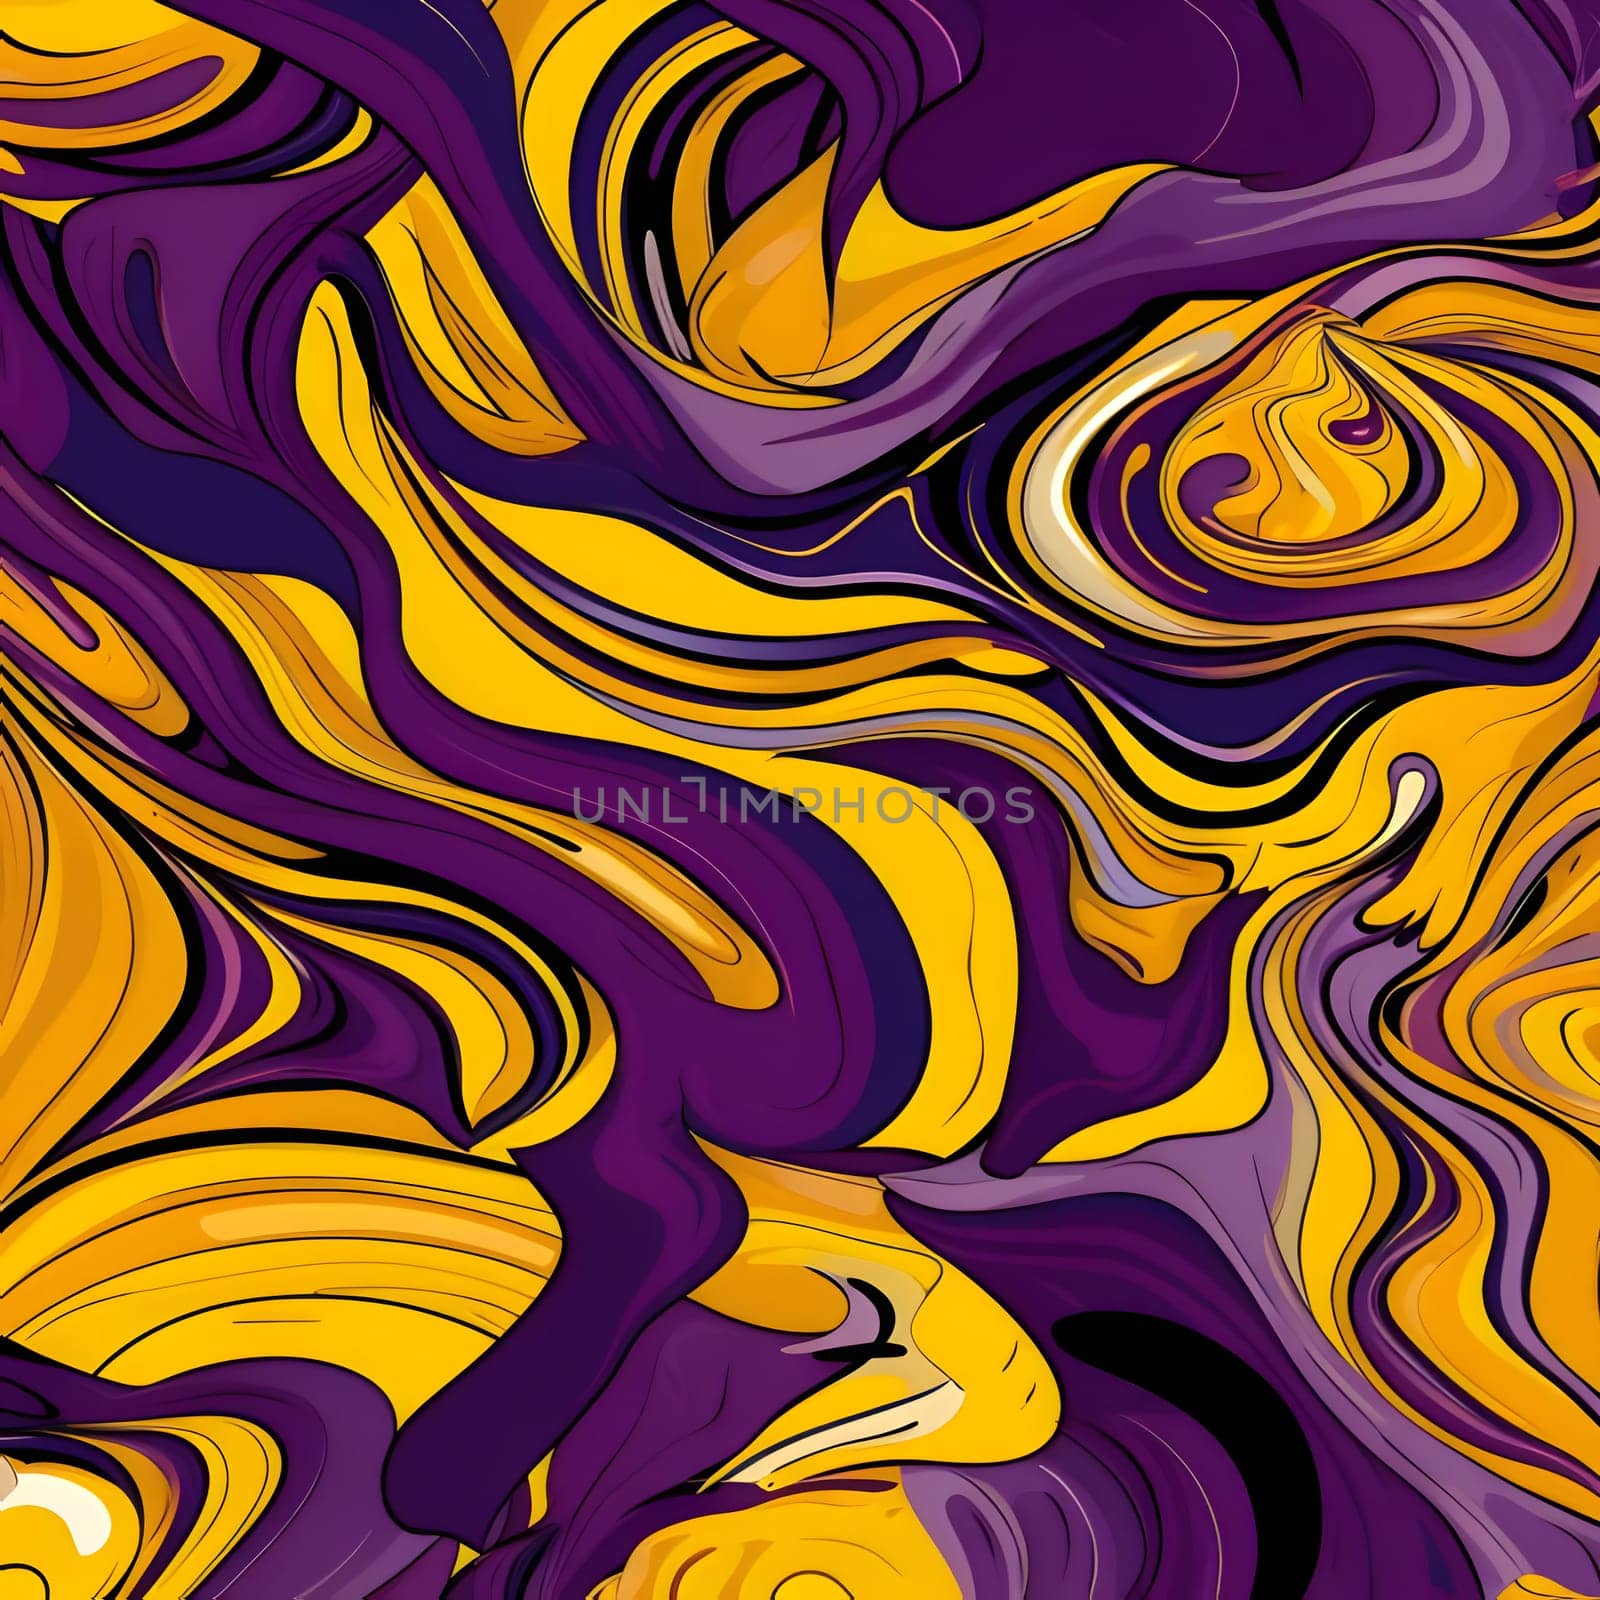 Patterns and banners backgrounds: Seamless background pattern. Abstract marbling pattern. Vector illustration.